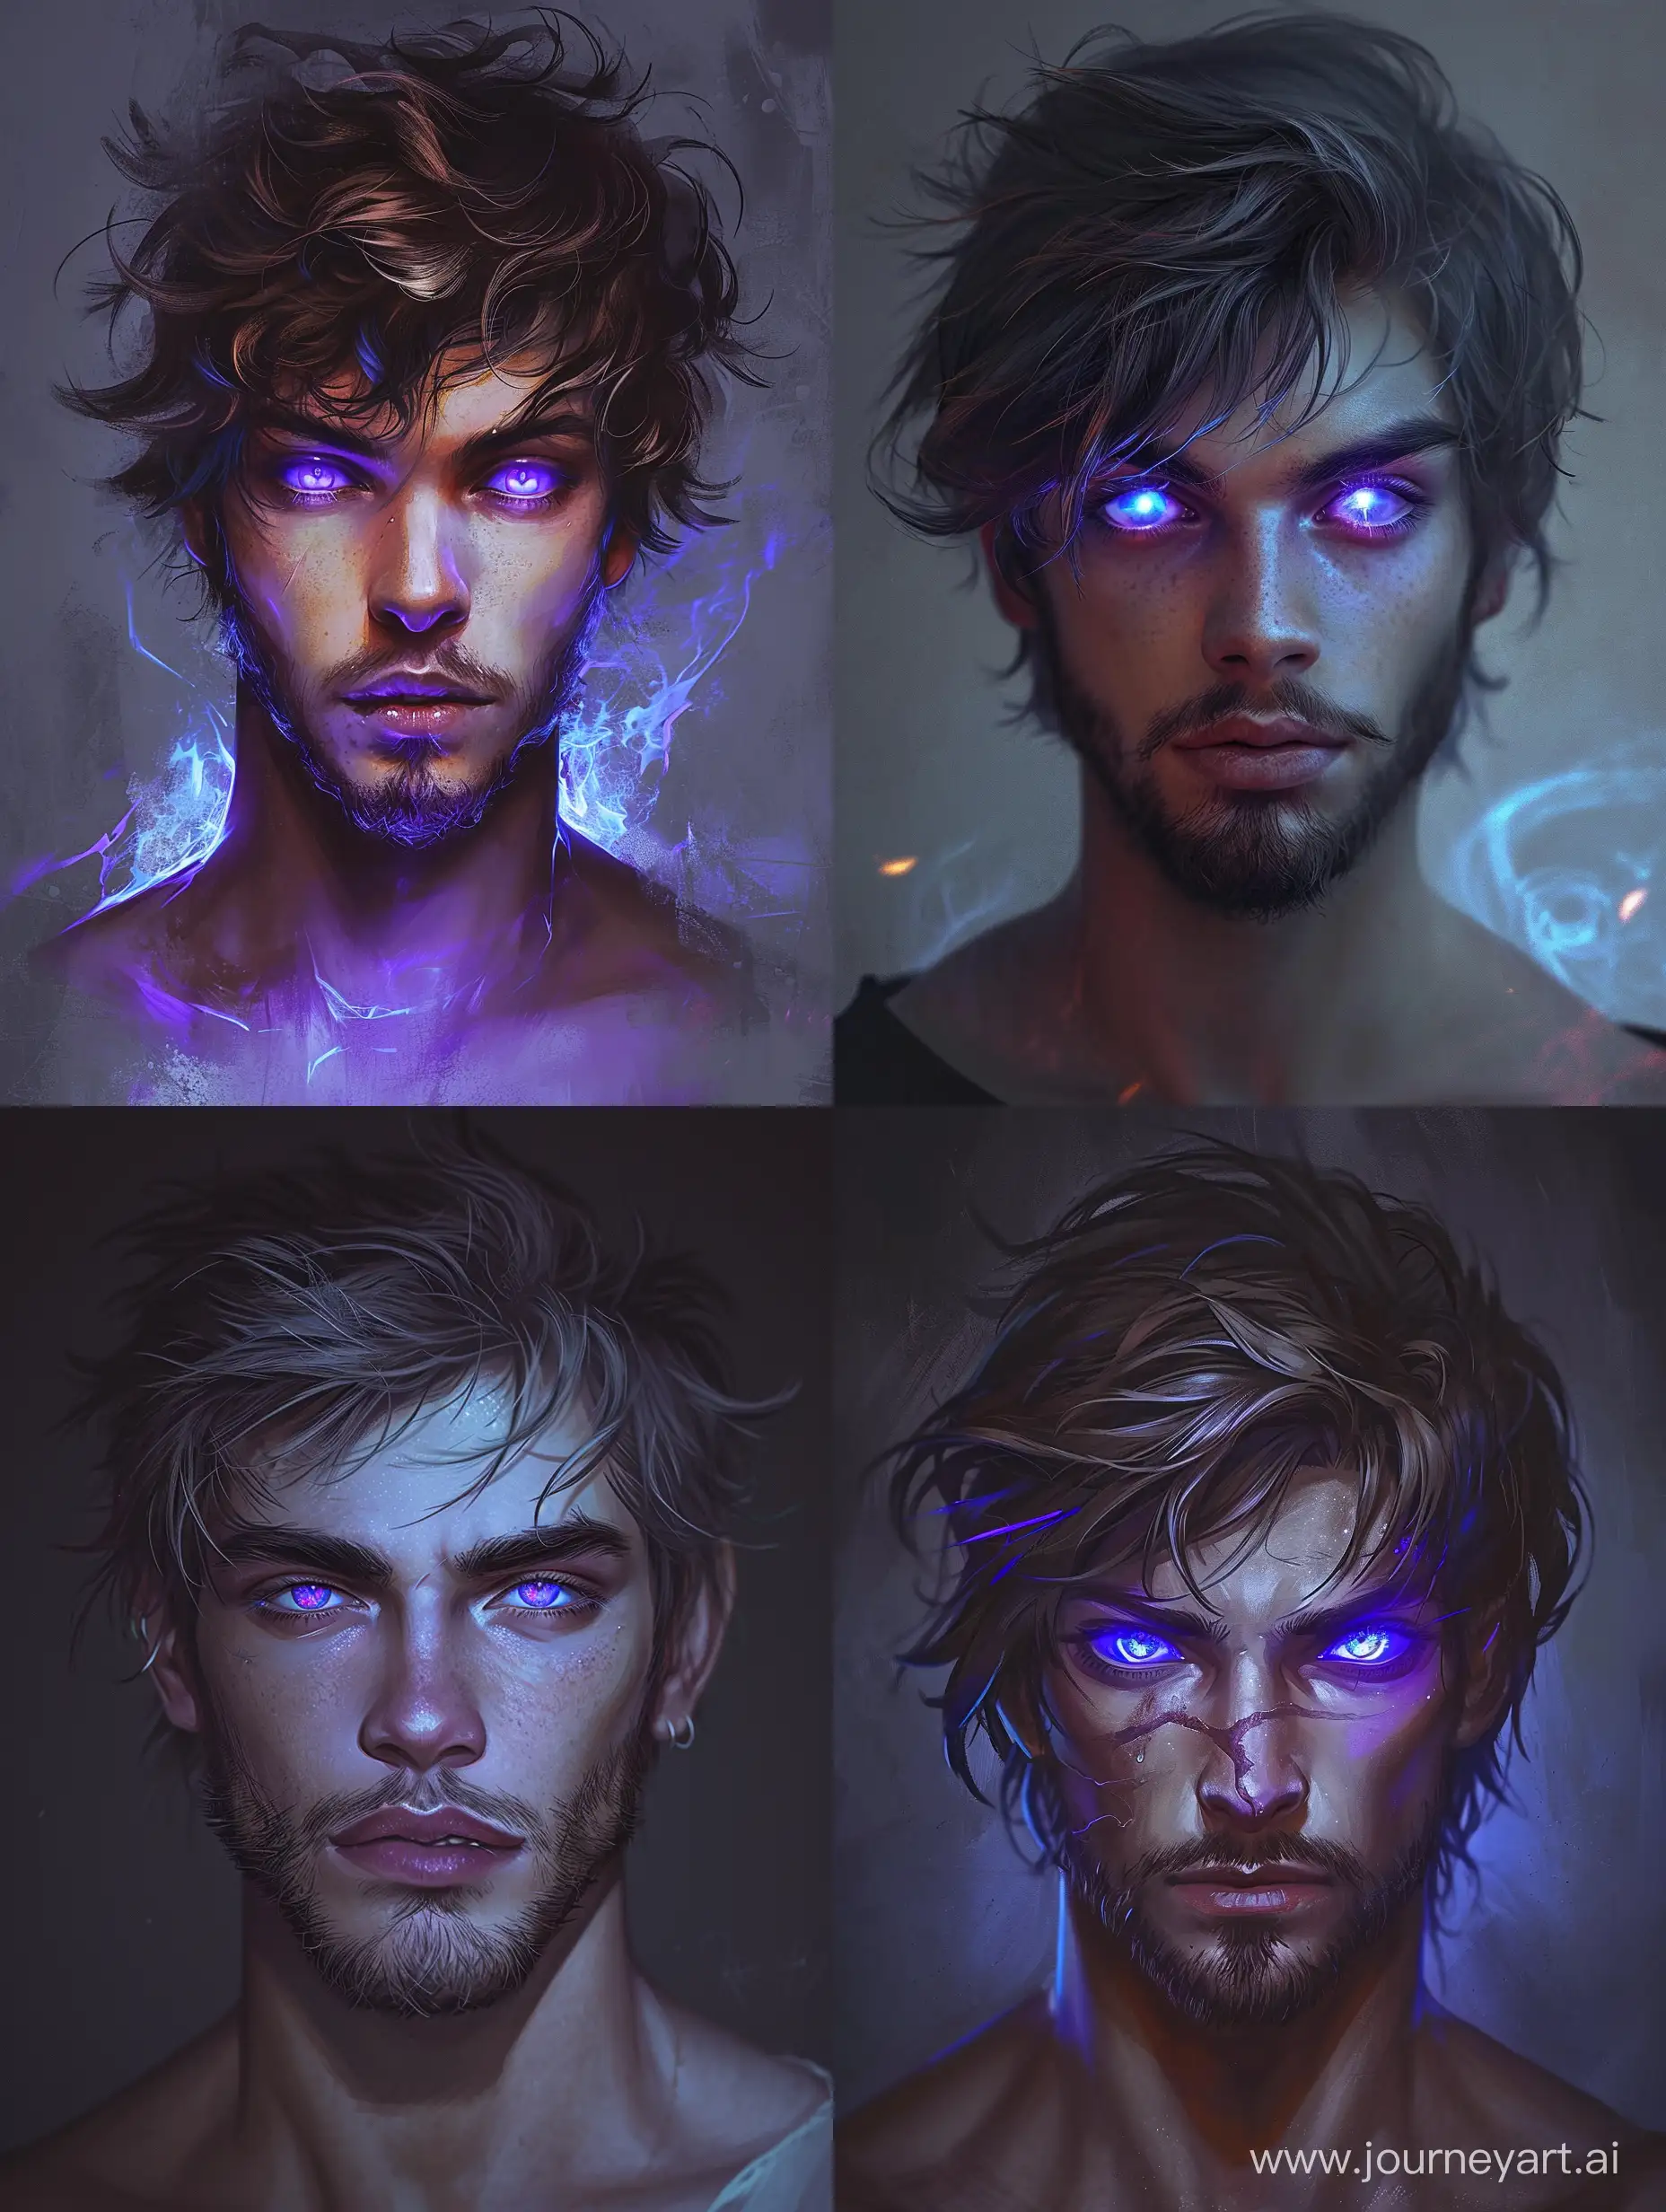 Dark Fantasy, An 18-year-old man with ashen hair, 180 cm tall, athletic build, luminous blue-purple eyes, and with a small beard